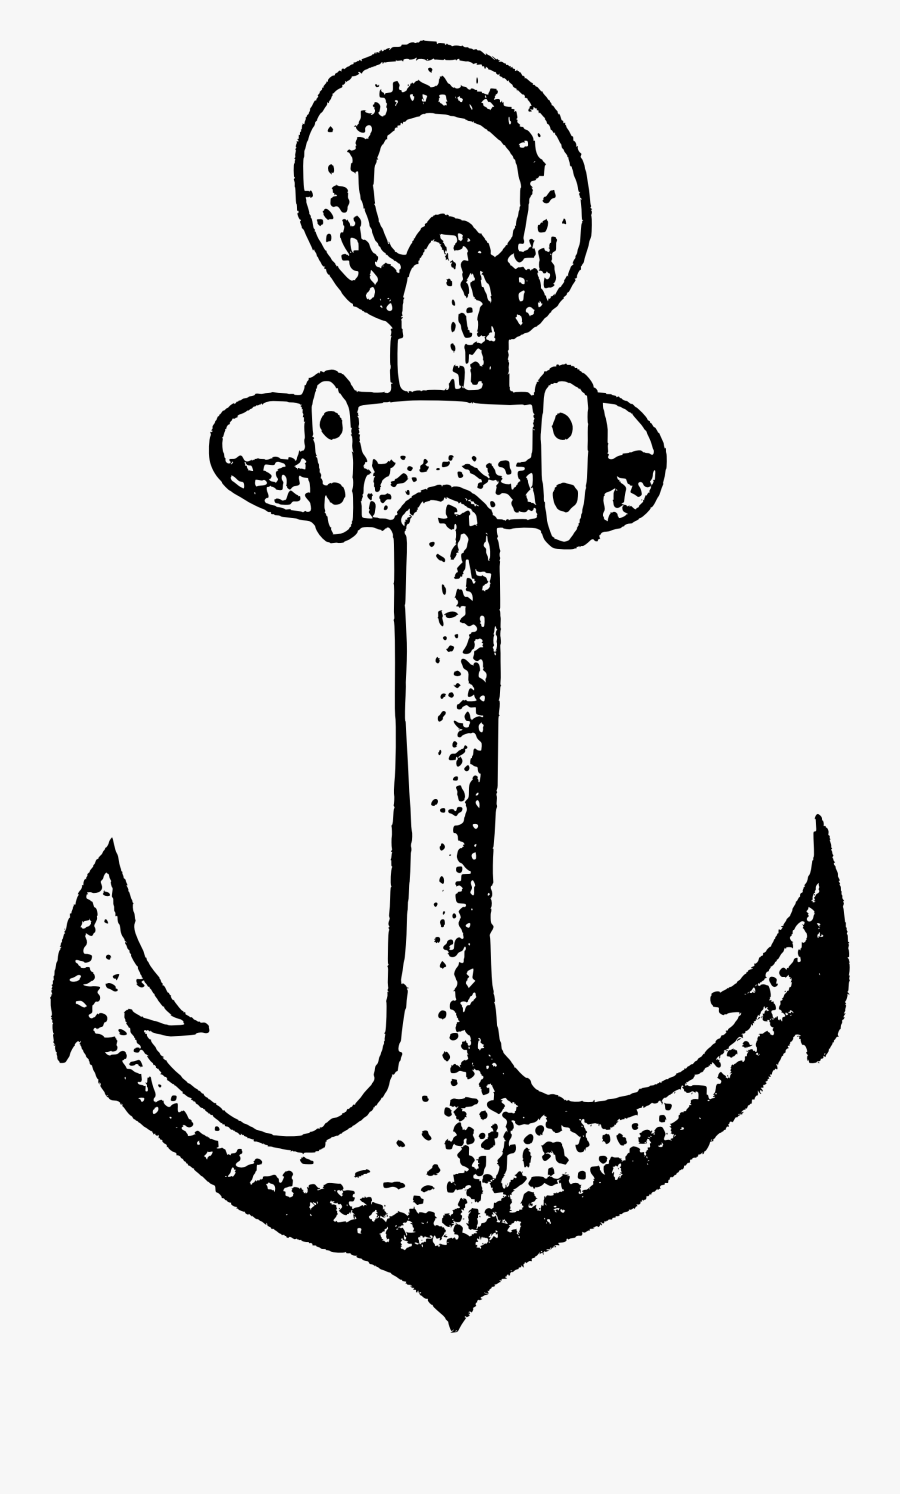 Transparent Anchor Clipart Black And White - Anchor Drawing Transparent Background, Transparent Clipart